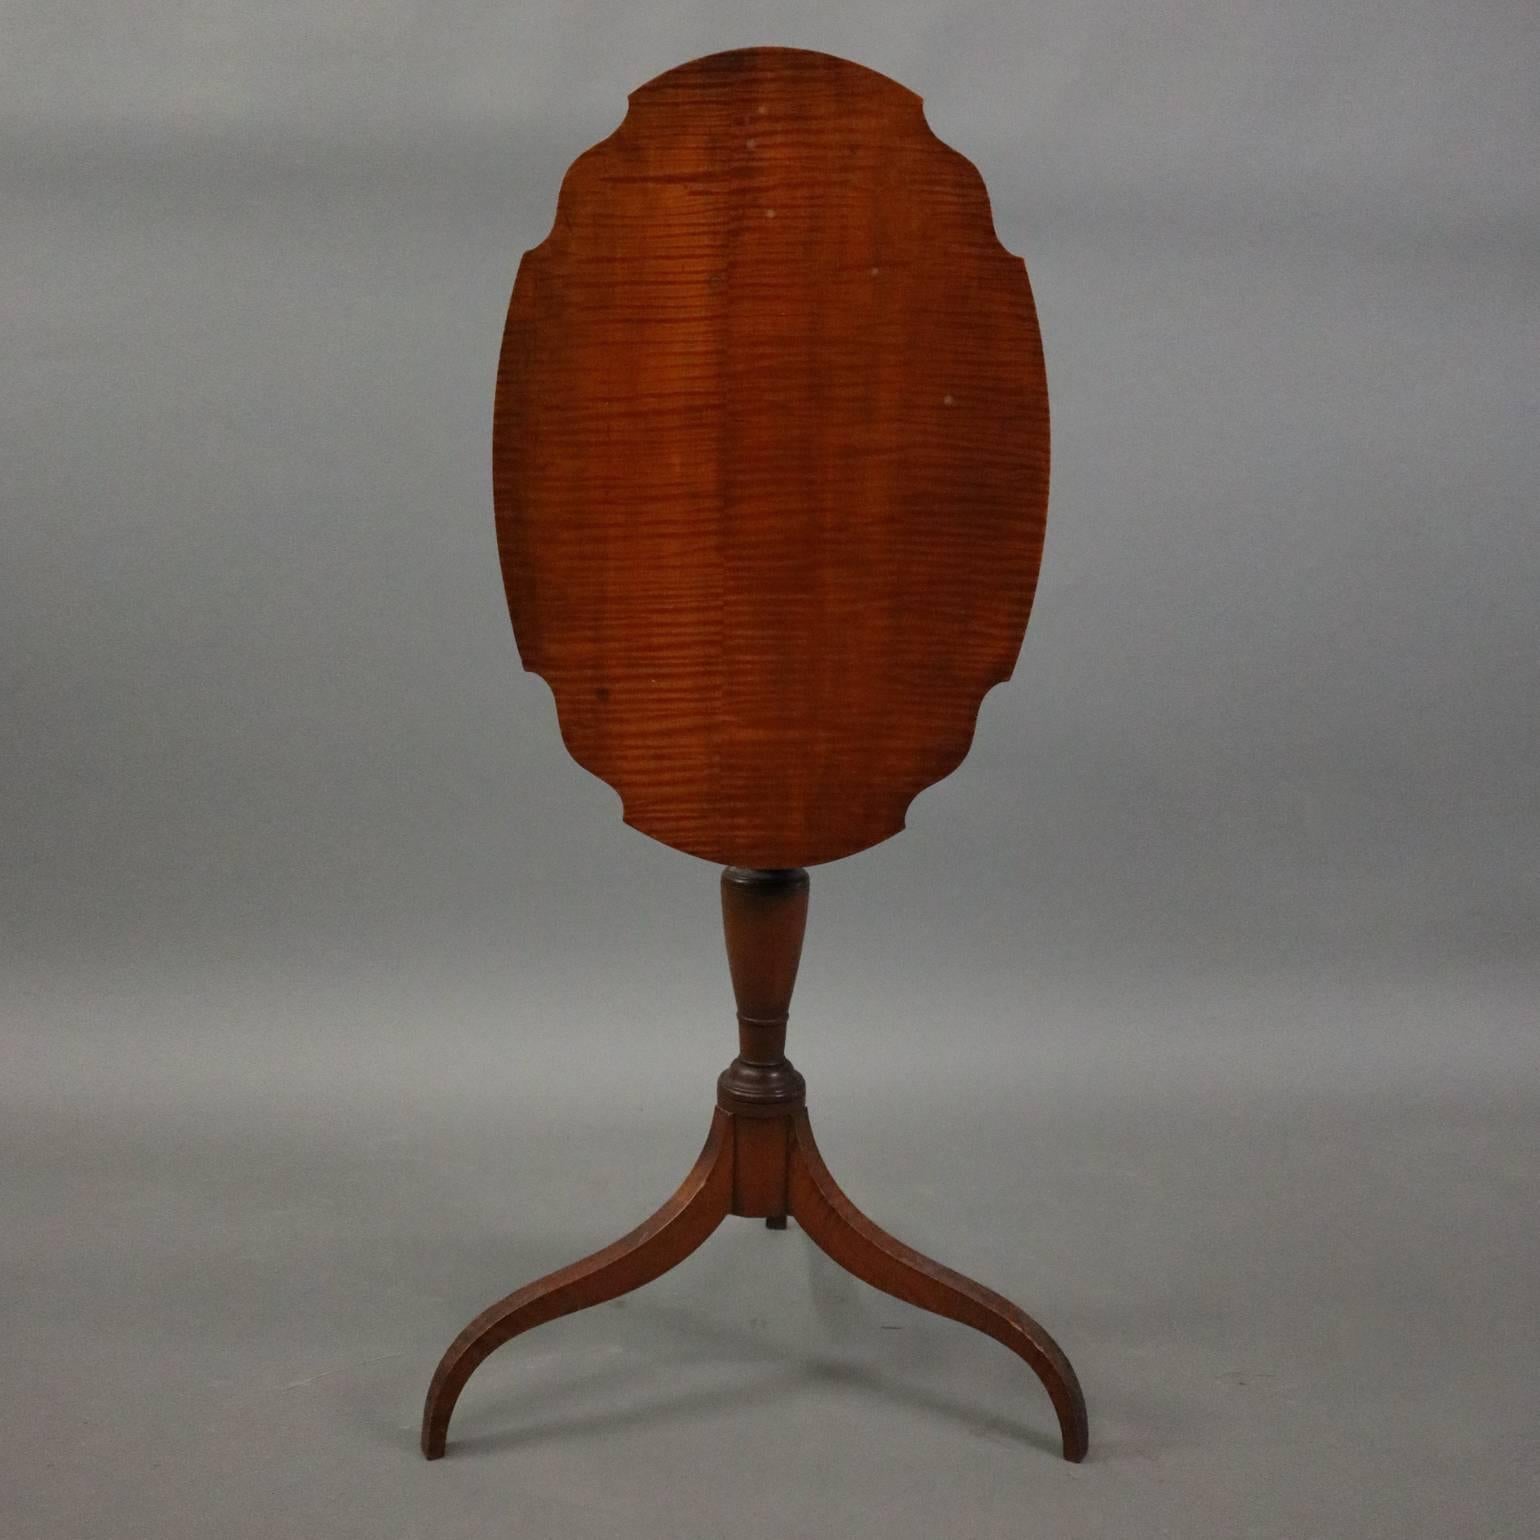 Antique Federal tiger maple lamp stand features scalloped tilt top and spider legs, circa 1850.

Measures 30" H x 24.5" W x 16.5" D (when tabletop is flat).